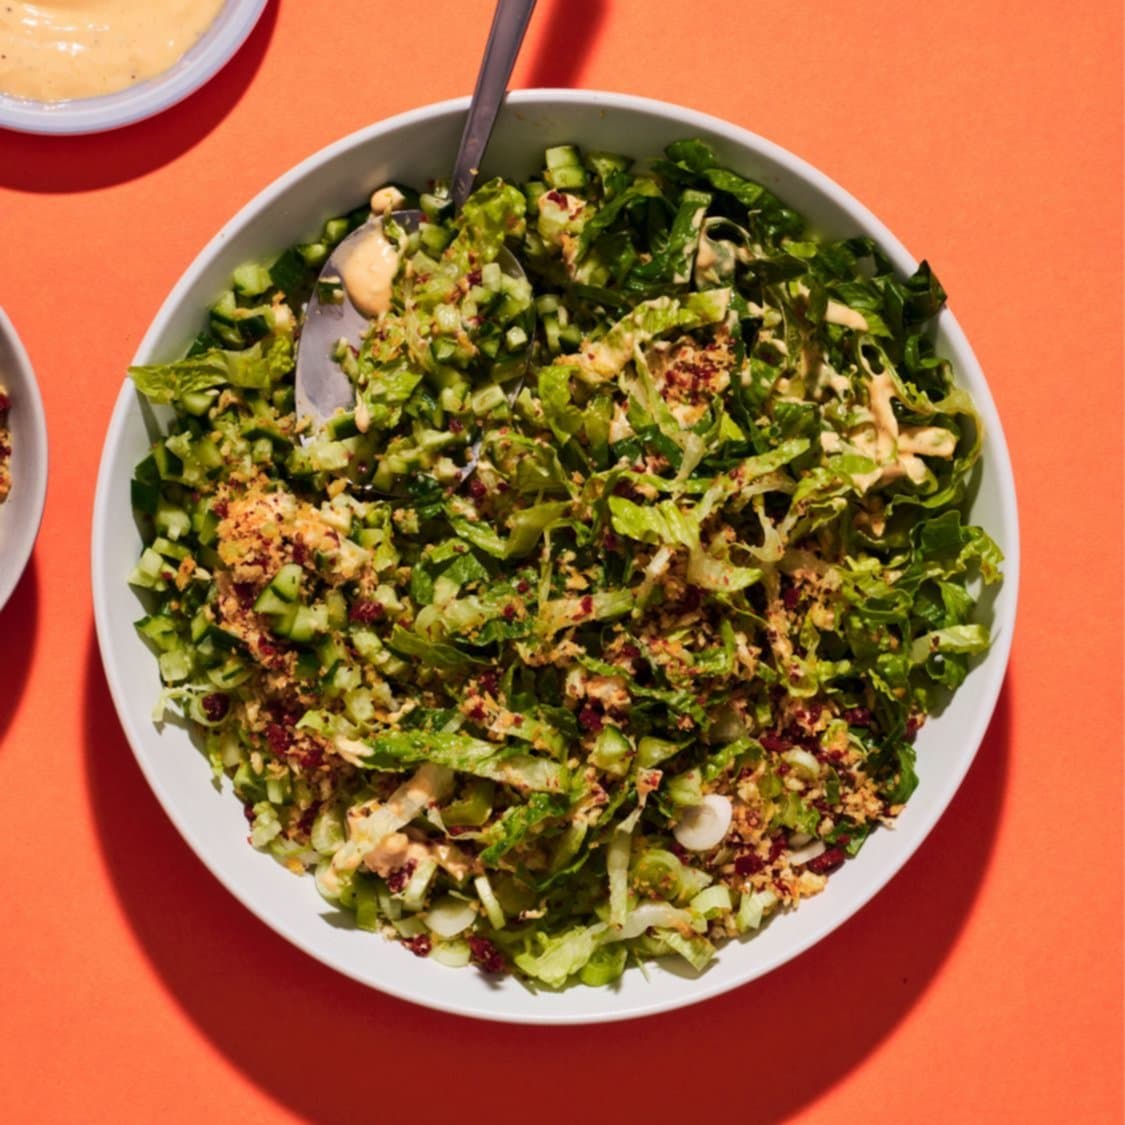 https://fleishigs.com/images/mobile-app/recipes/3643-list-all-green-salad-with-garlic-charcuterie-breadcrumbs.jpg